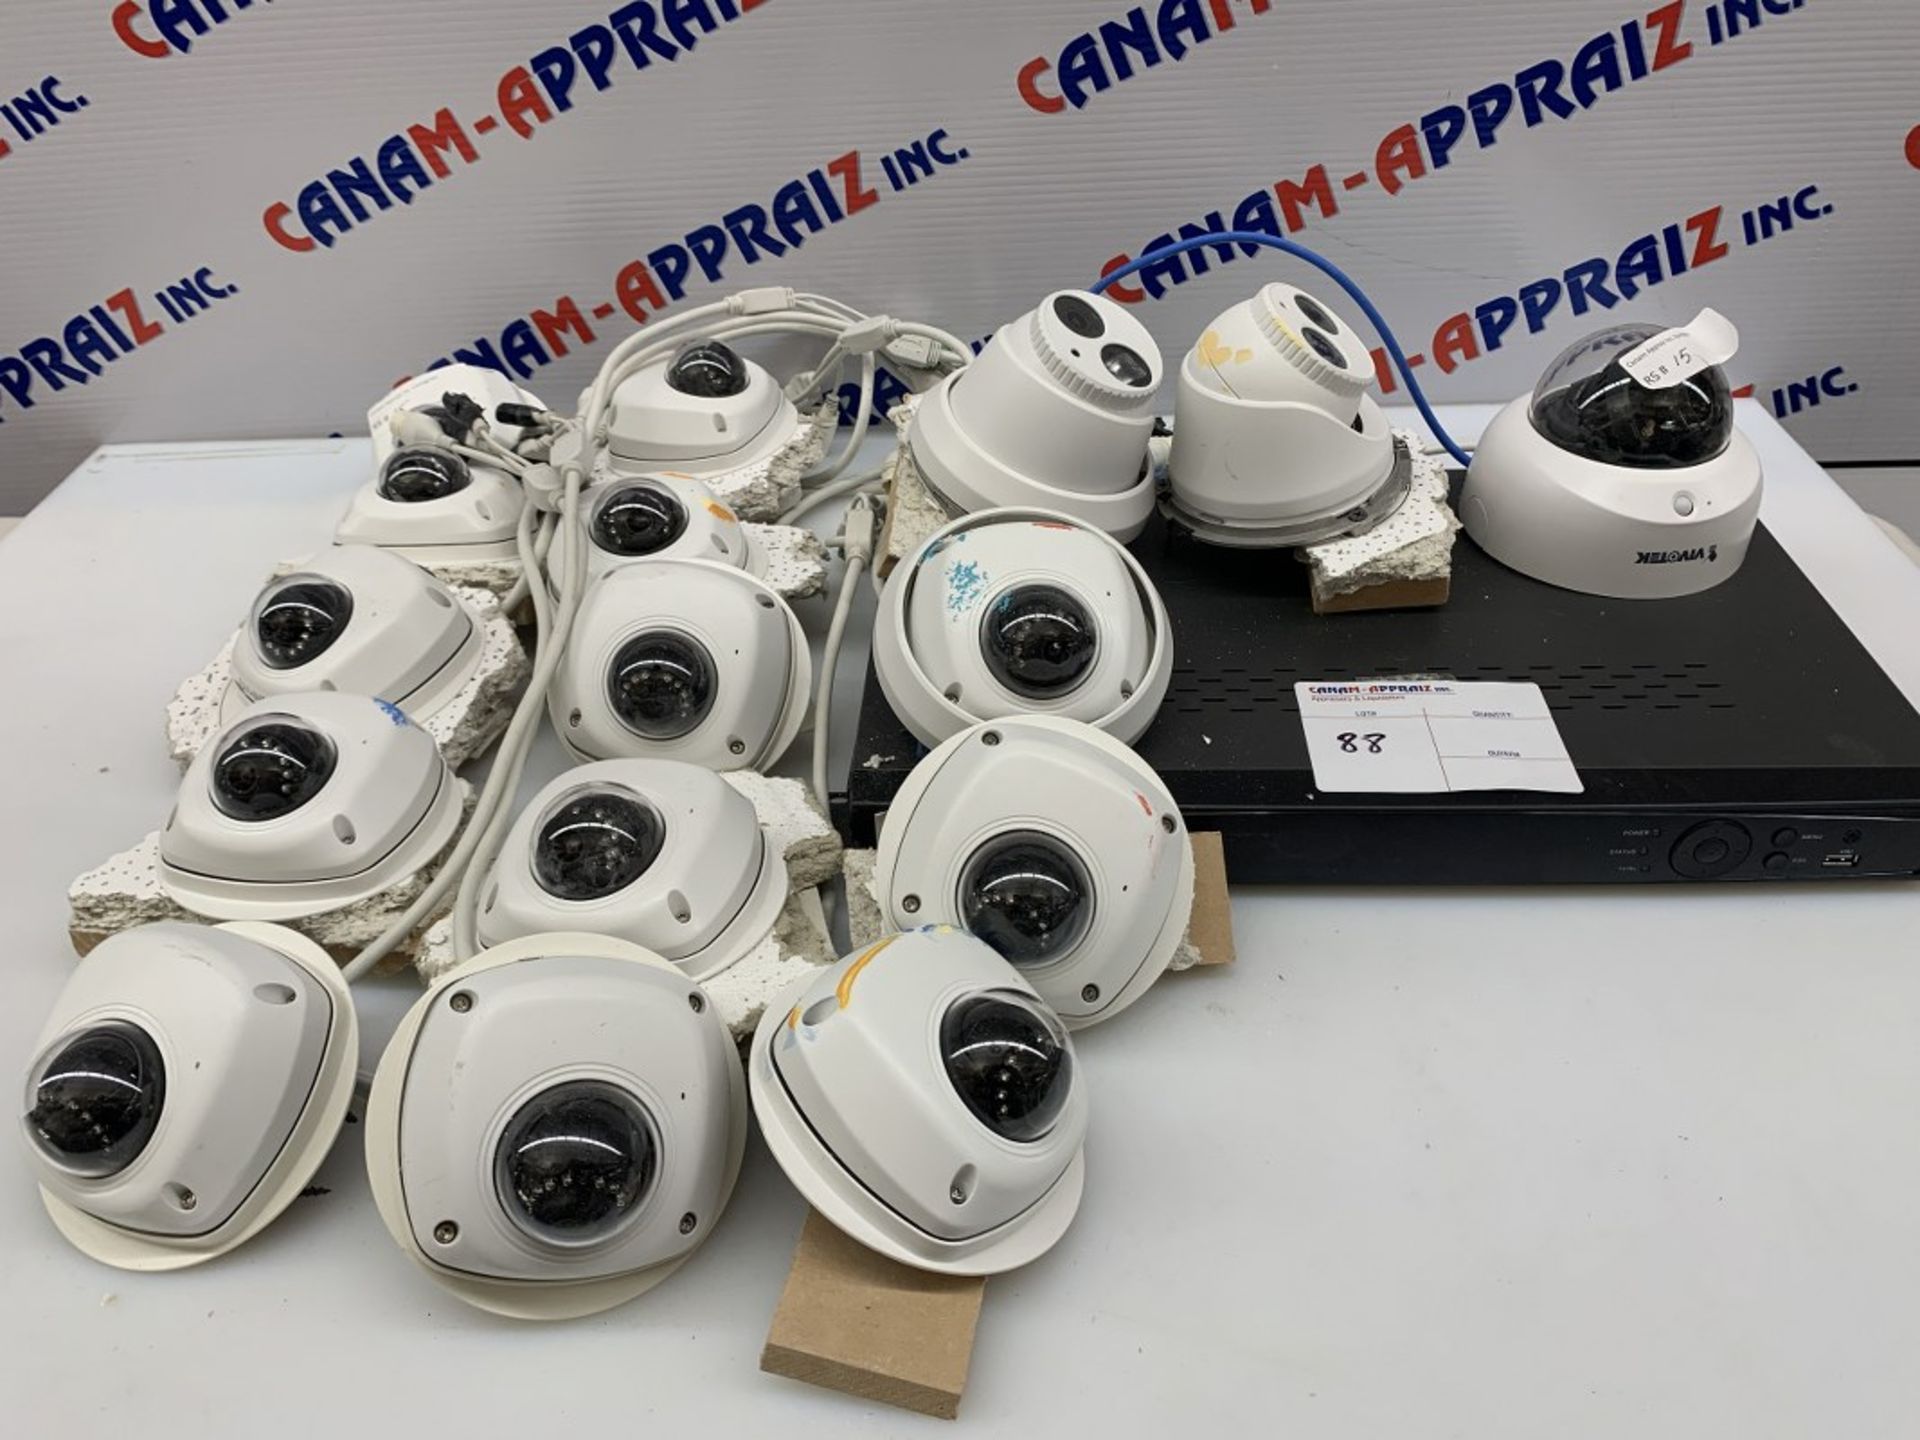 MIXED LOT - ASSORTED IR NETWORK CAMERAS W/ DVR SYSTEM (SEE PHOTOS) - 17 PCS